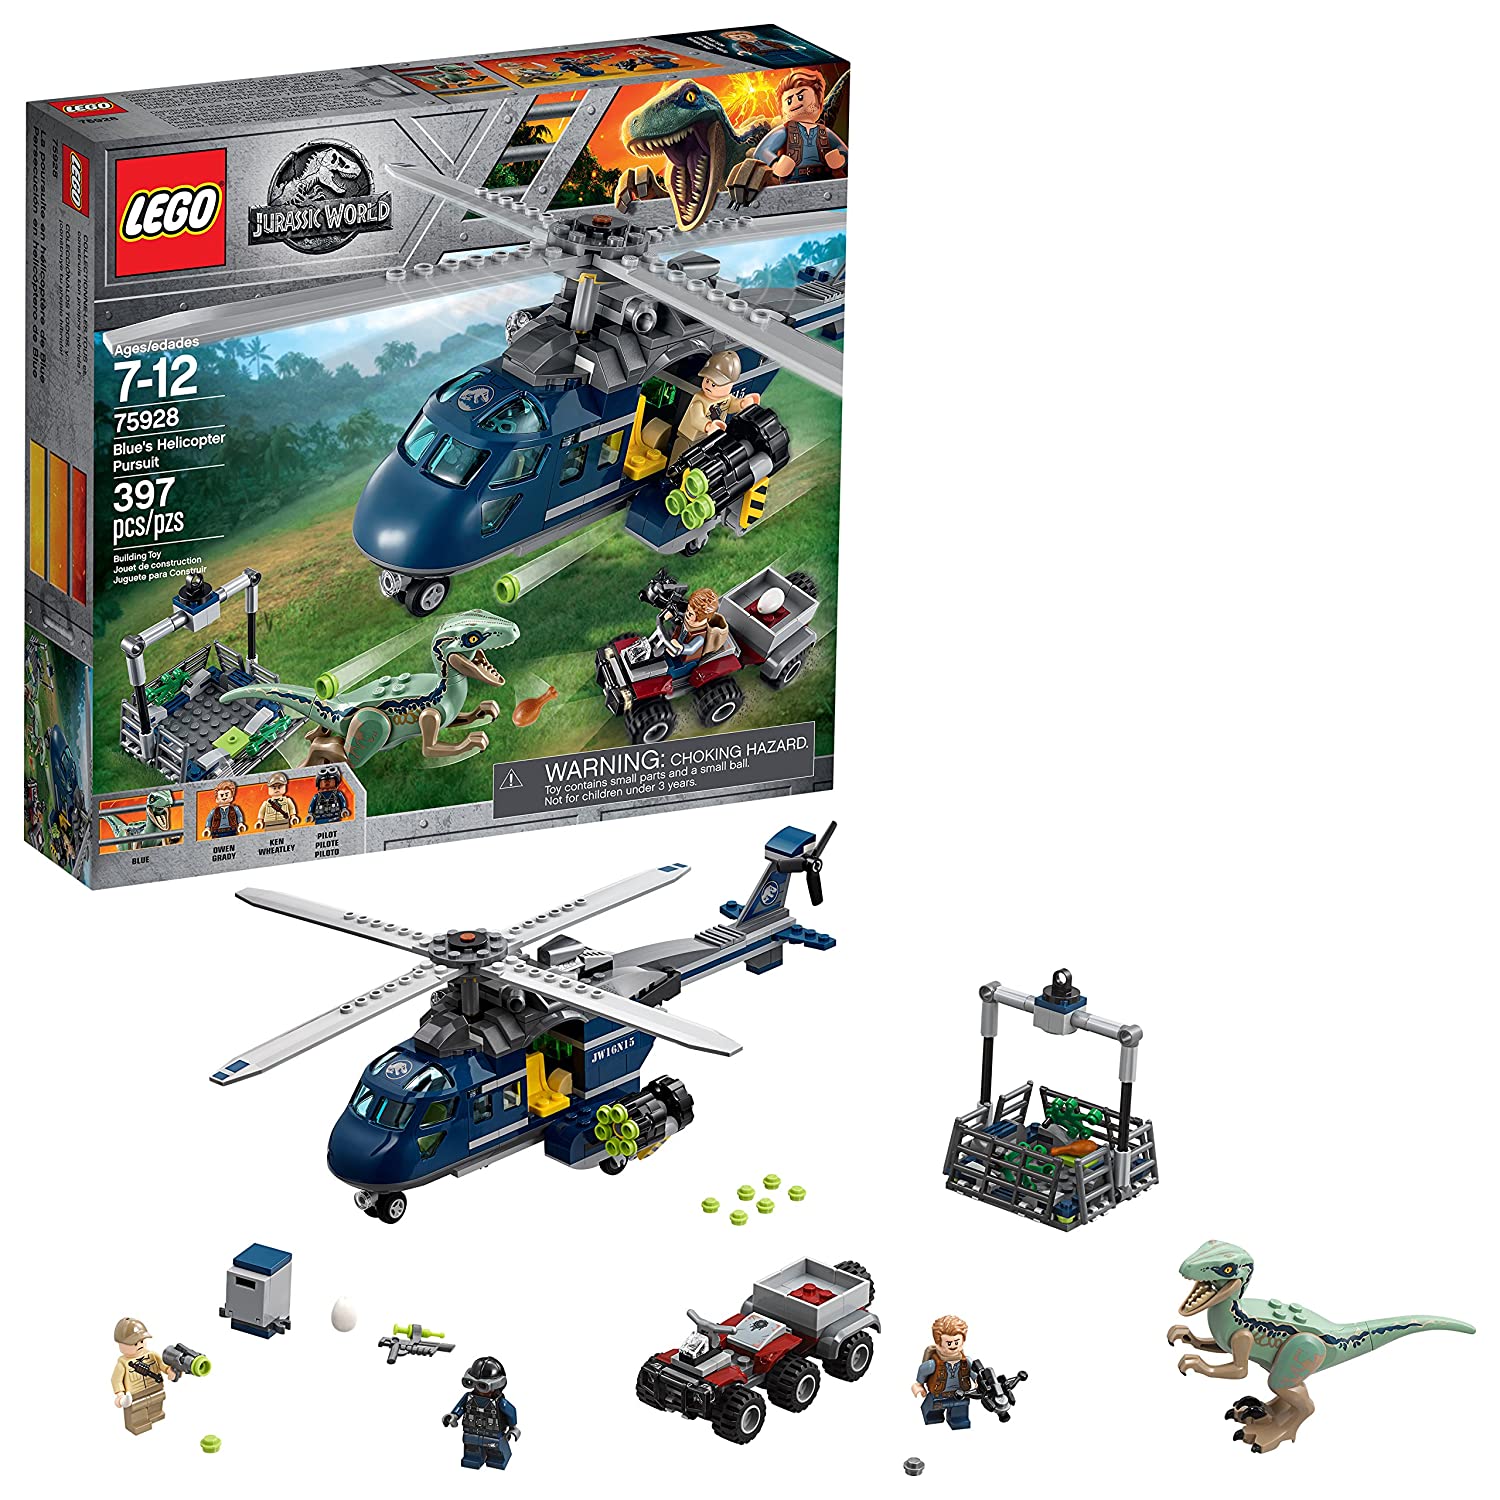 Top 9 Best Lego Jurassic Park Sets Reviews in 2022 6